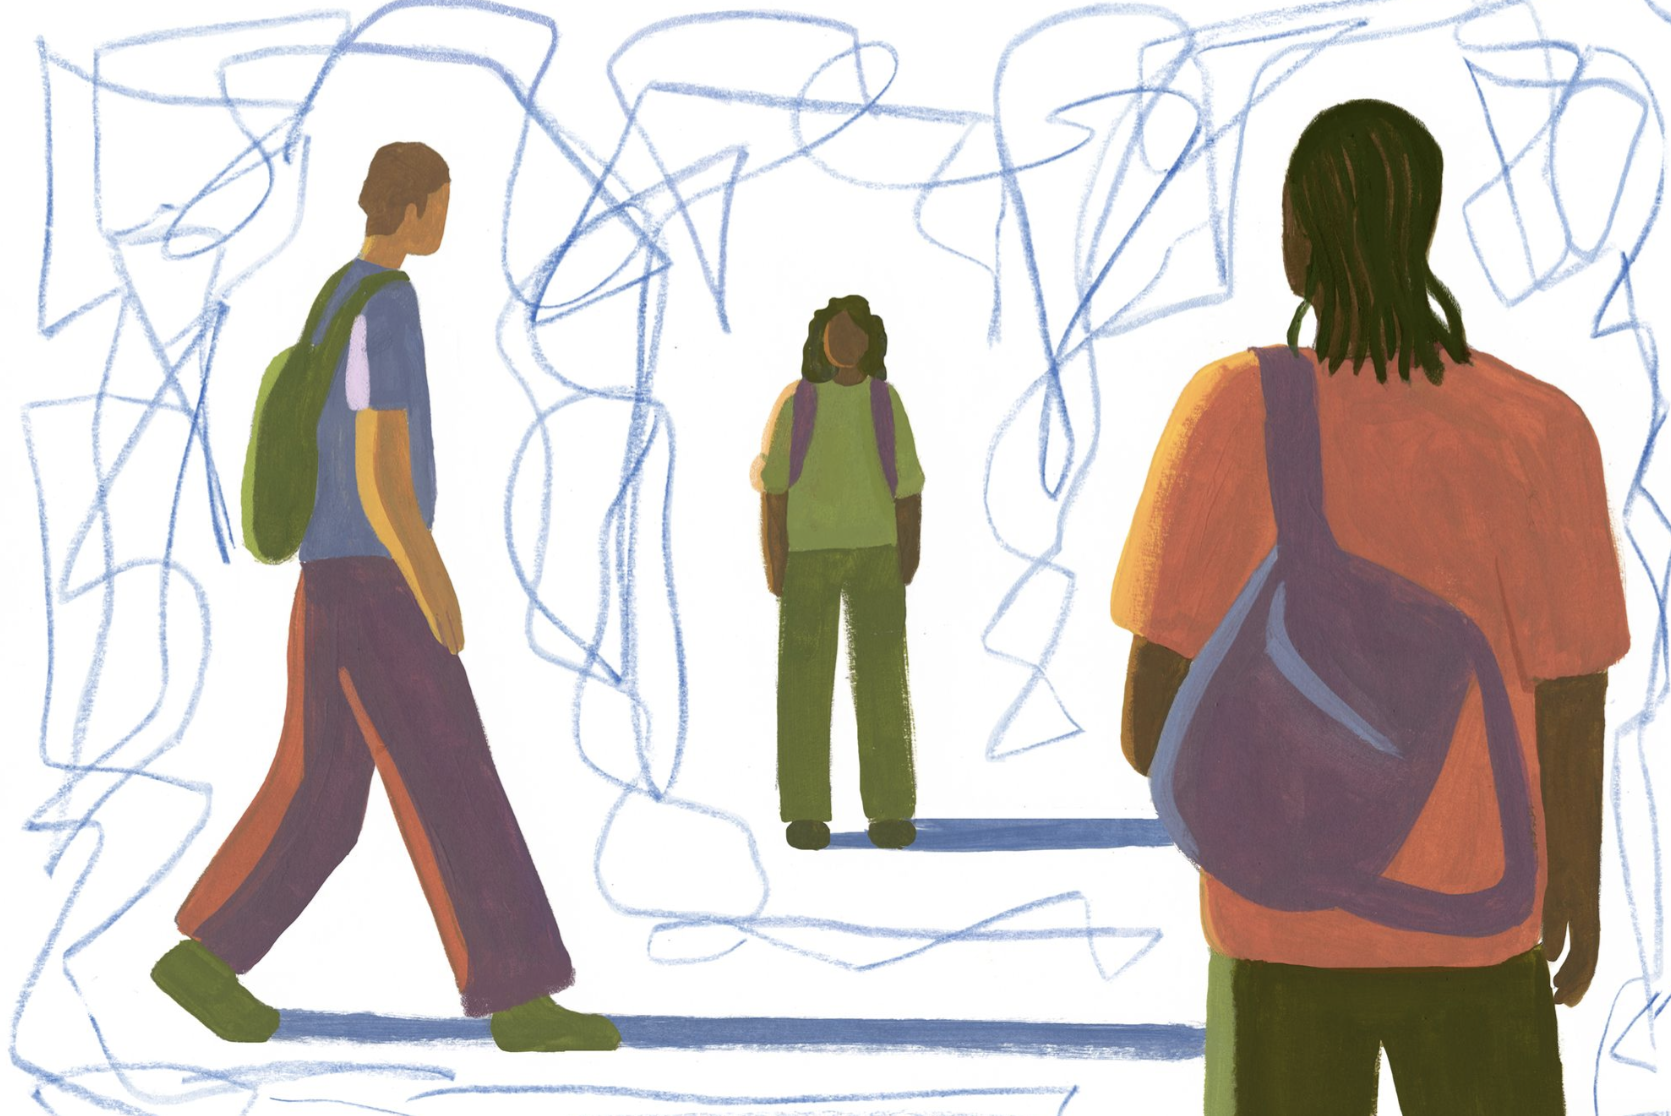 Public Schools Are NYC’s Main Youth Mental Health System. Where Kids Land Often Depends on What Their Parents Can Pay